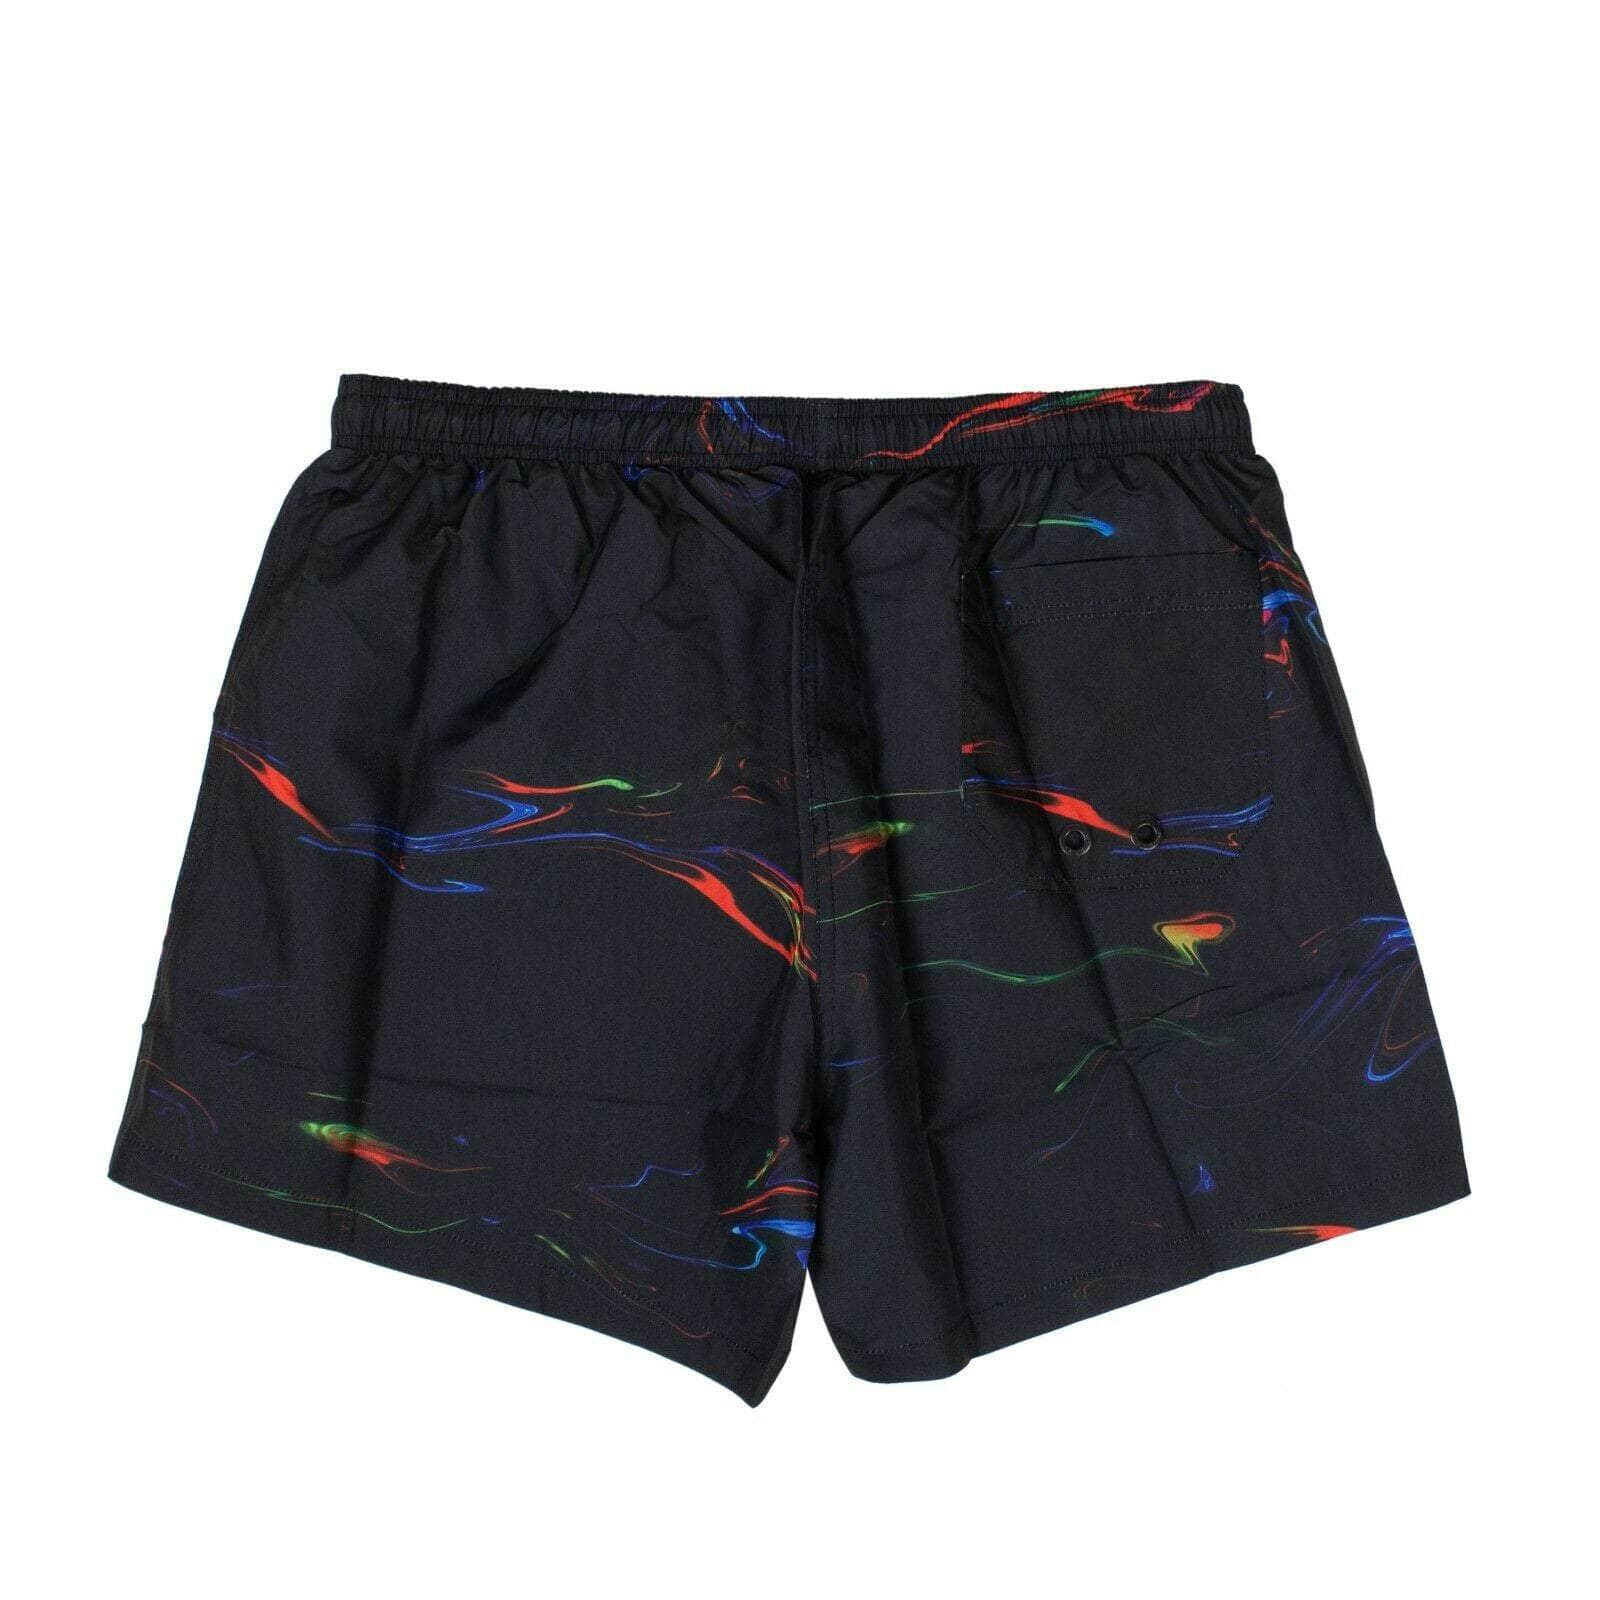 Marcelo Burlon chicmi, couponcollection, gender-mens, july4th, main-clothing, marcelo-burlon, marcelo12, MBUP, mens-bathing-suits, mens-shoes, size-xxs, under-250 XXS Polyester 'All Over Lights' Beach Shorts - Black 74NGG-MB-1122/XXS 74NGG-MB-1122/XXS